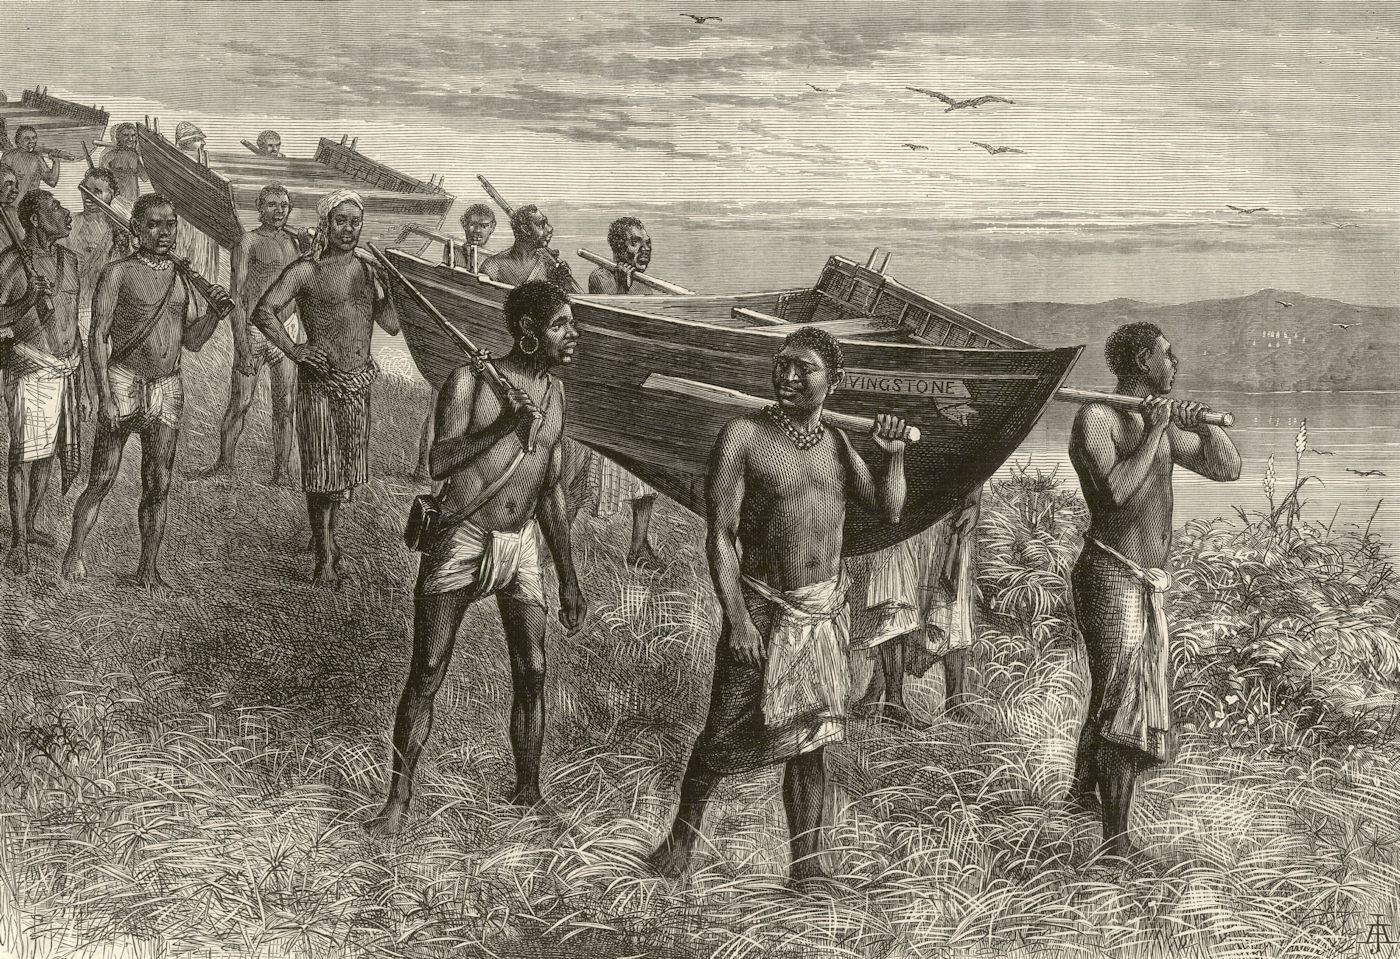 Mr. H. M. Stanley's boat, the " Livingstone, " carried overland in Africa 1875